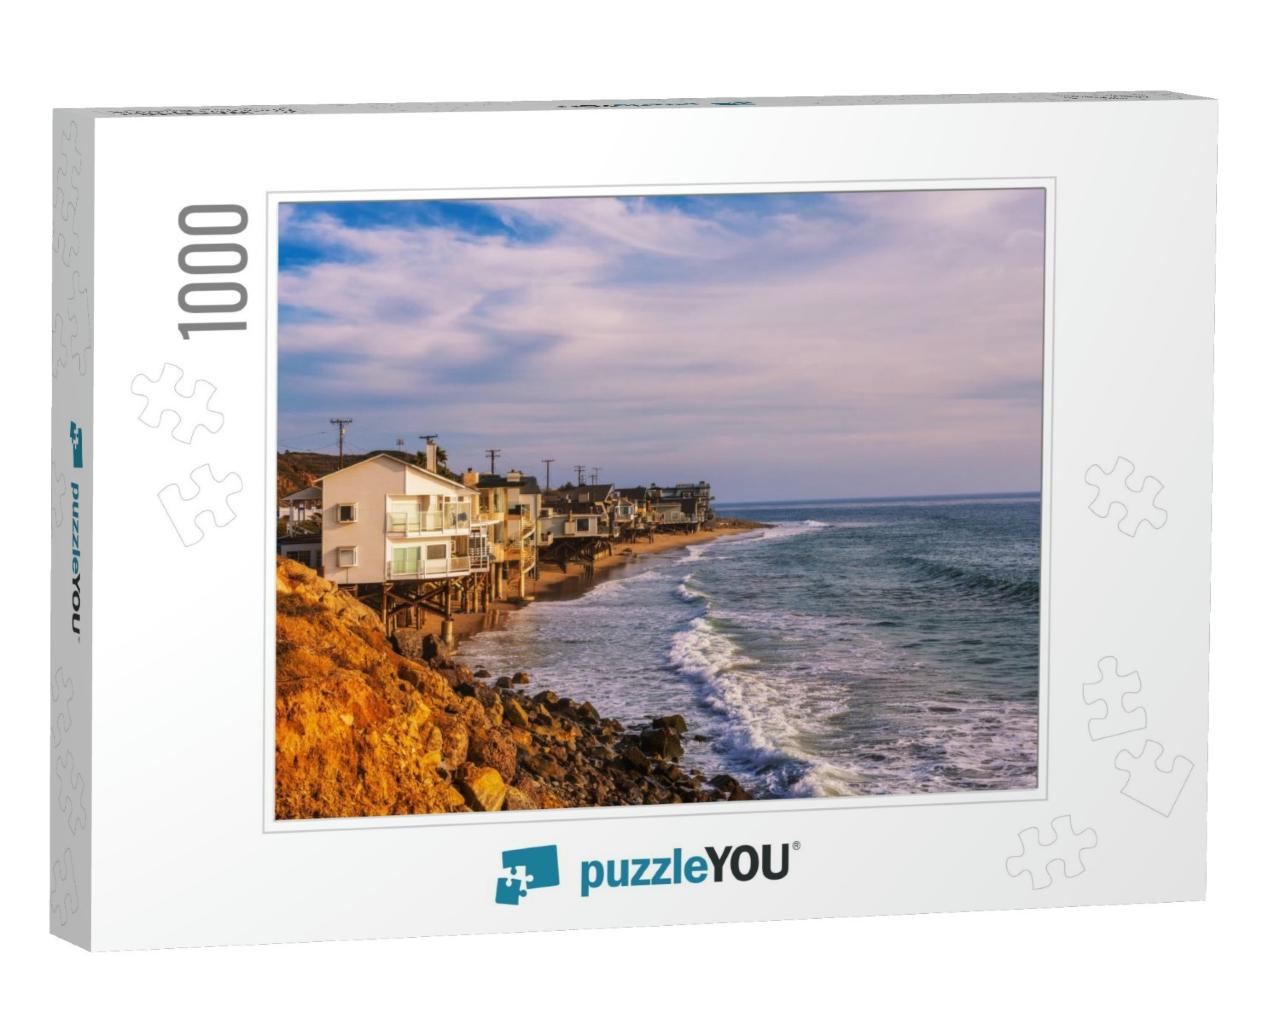 Luxury Oceanfront Homes of Malibu Beach Near Los Angeles... Jigsaw Puzzle with 1000 pieces